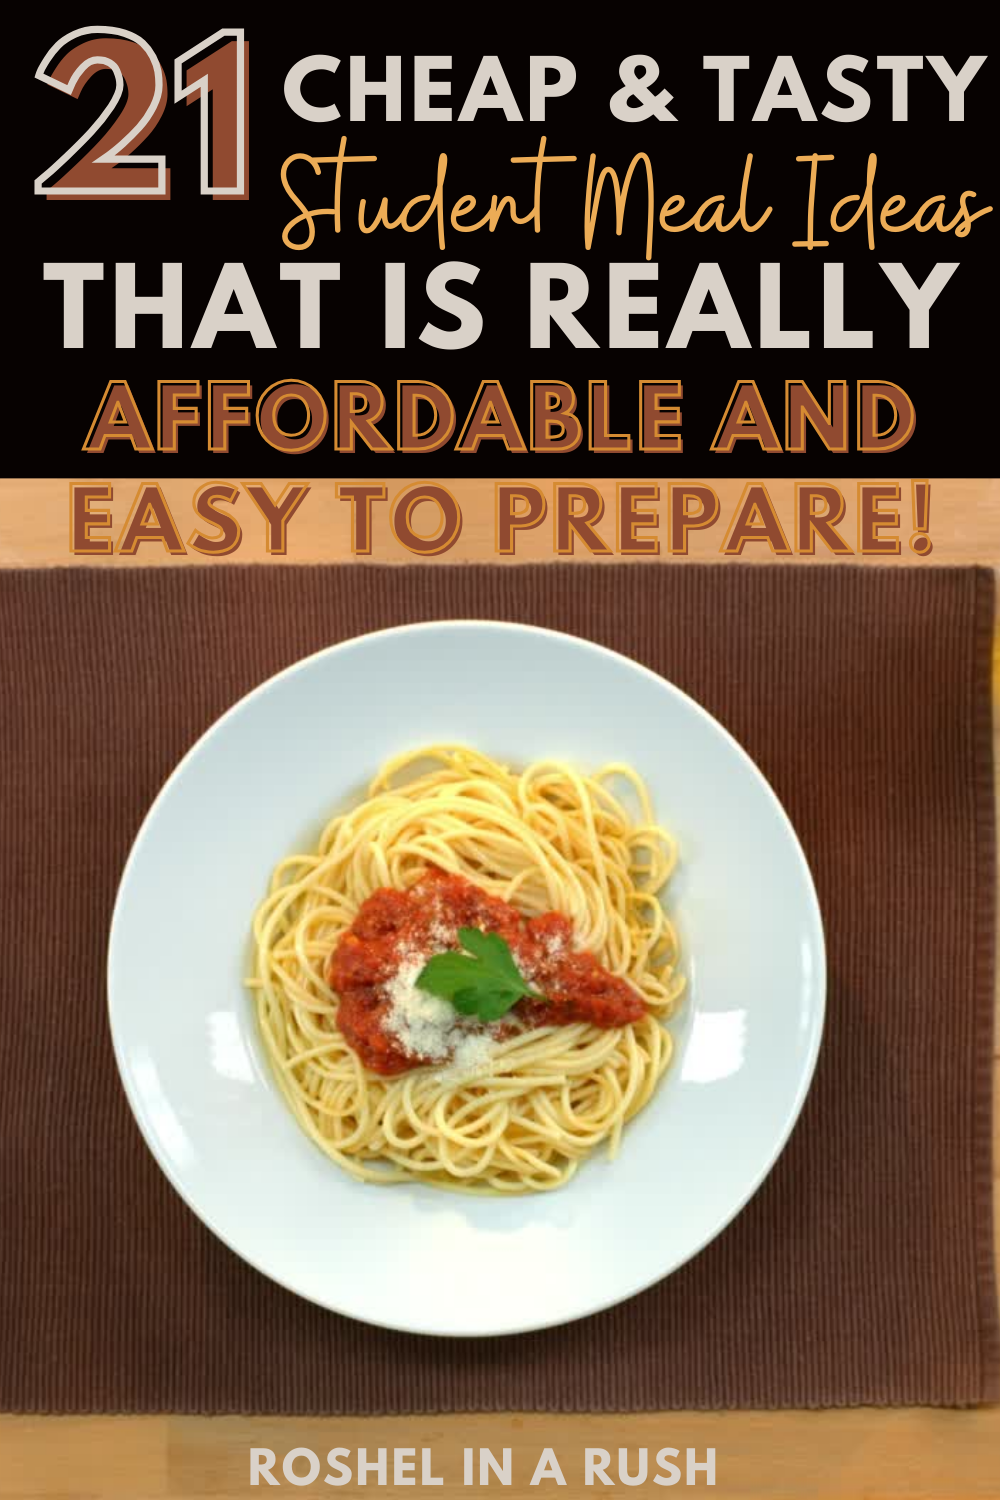 21 Student Meal Ideas for Thrifty Foodies